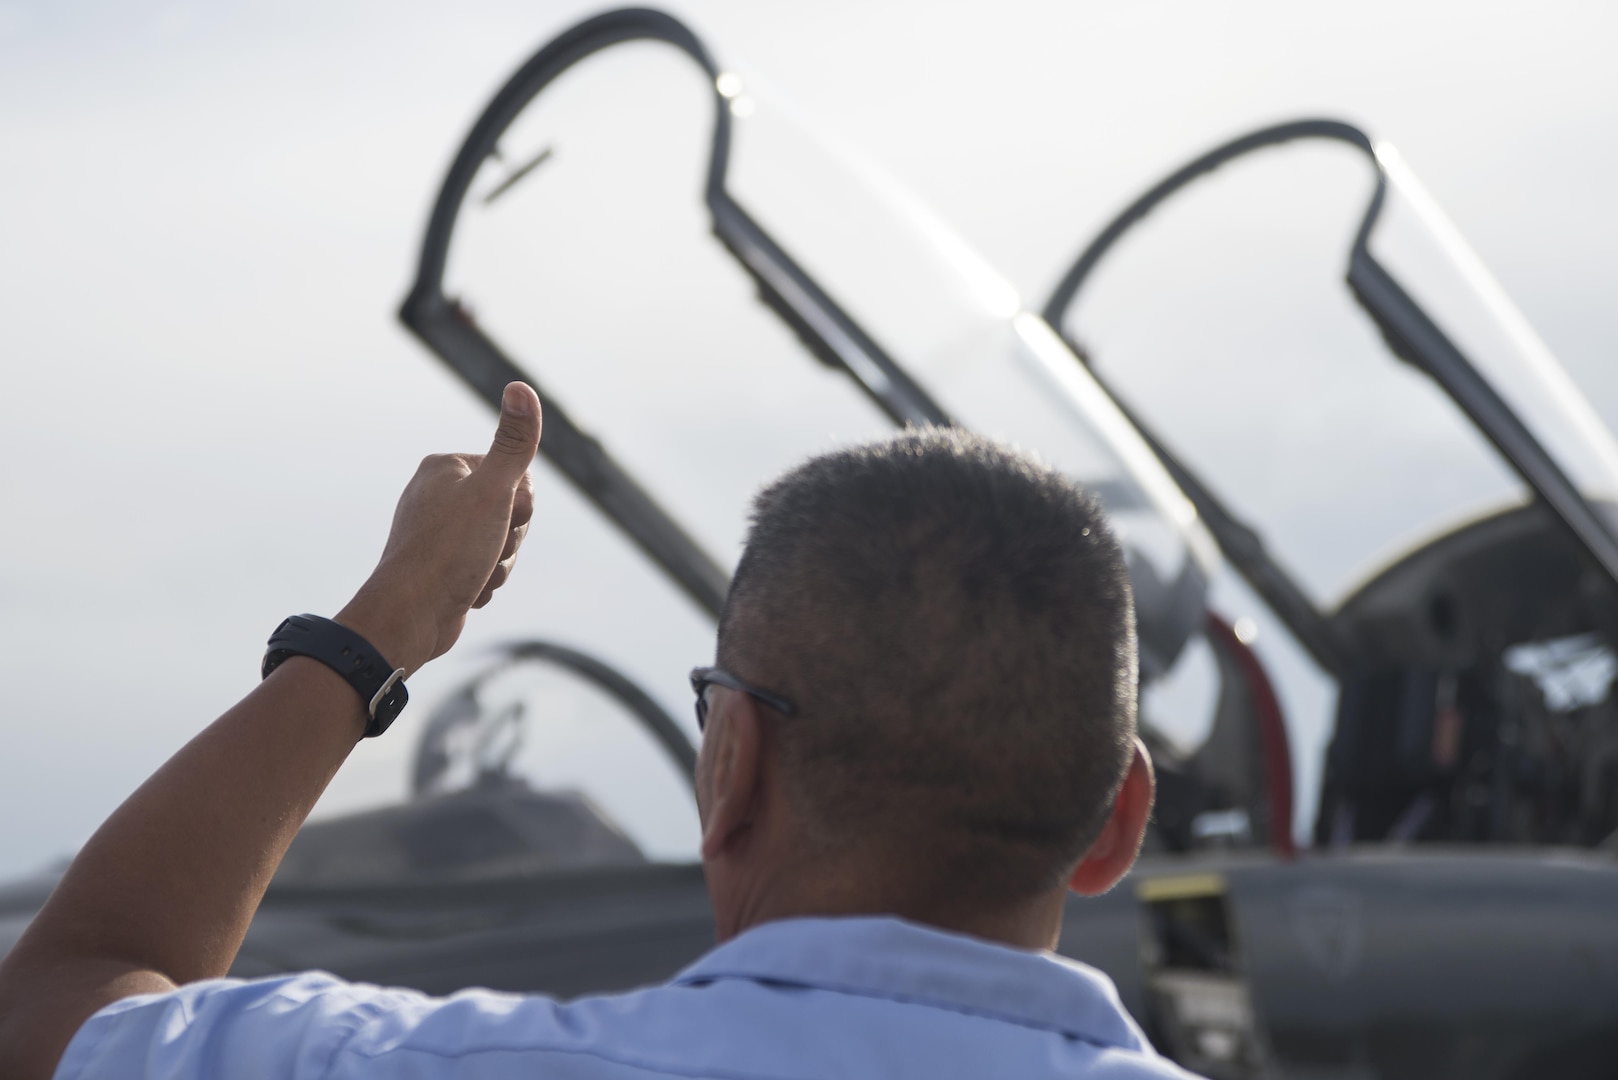 Chris Bahe, 12th Flying Training Wing T-38C Talon II crew chief, hand signals to the pilot and other aircraft workers that the aircraft is safe and ready for flight at Joint Base San Antonio-Randolph Nov. 8, 2016. Bahe, who retired from the Navy, has also worked on A-6 Intruders, P-3 Orions, F-14 Tomcats and F-18 Hornets. (U.S. Air Force photo by Airman 1st Class Lauren Ely/Released)